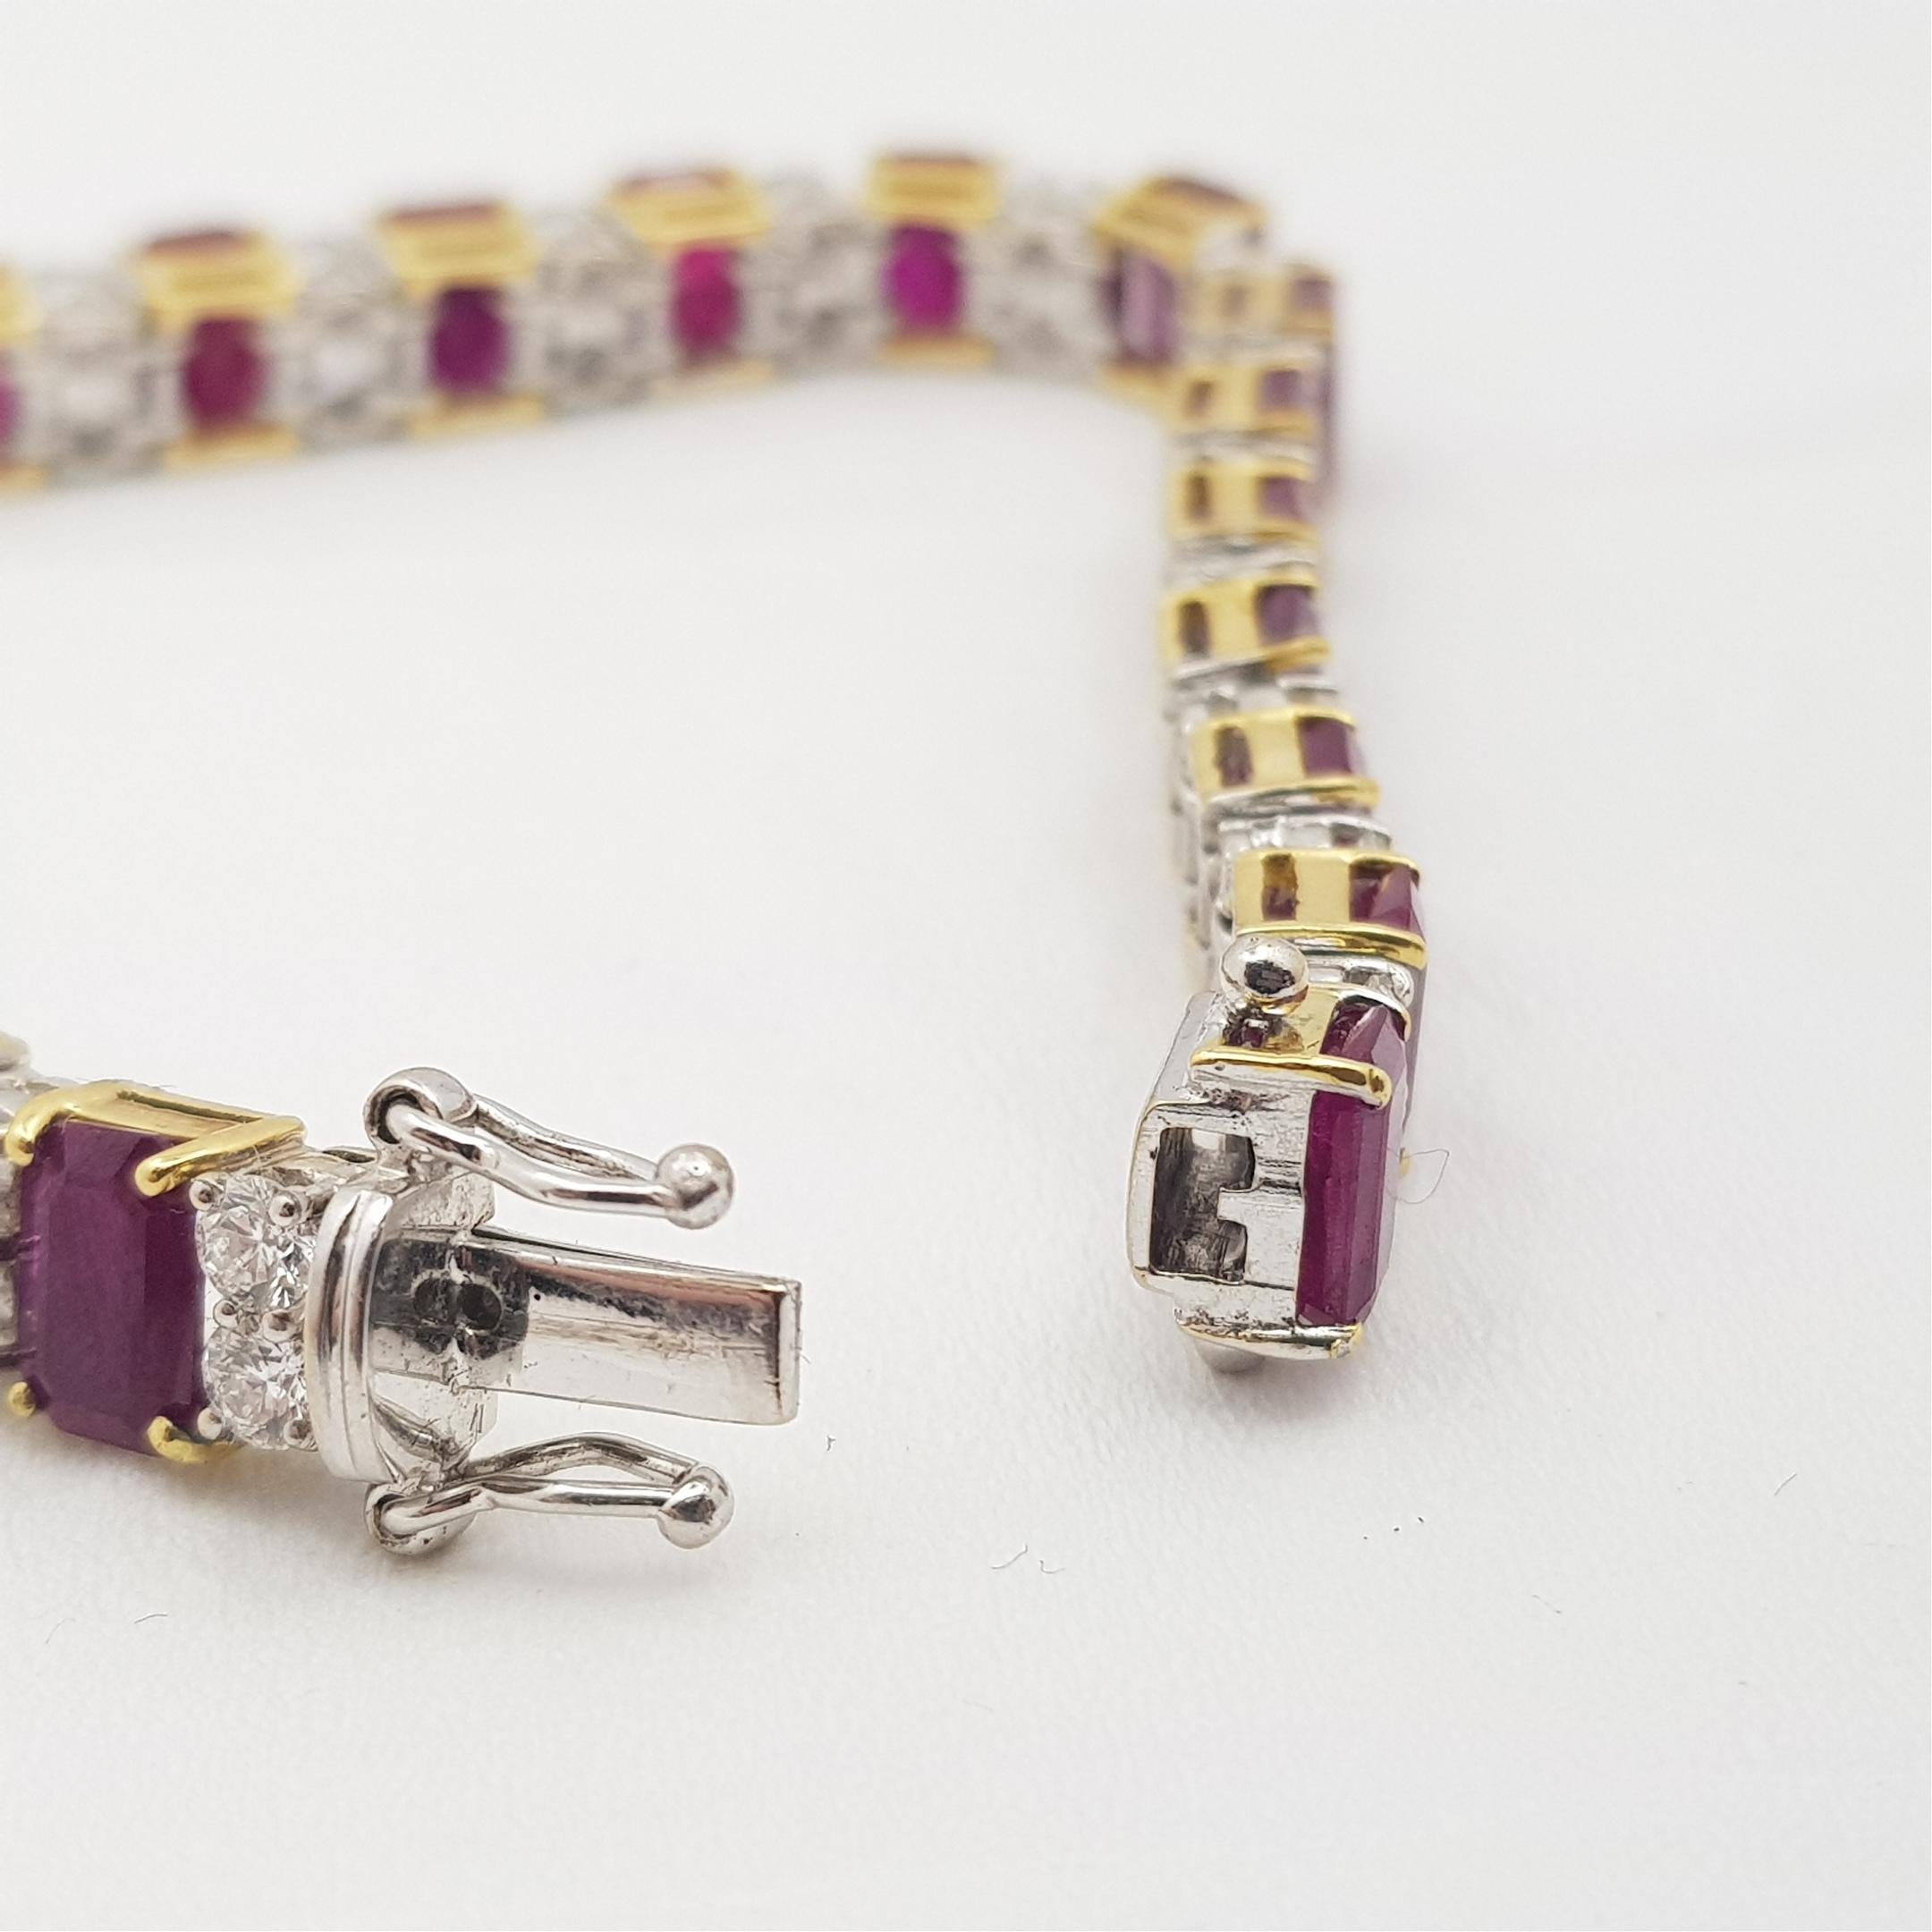 18ct Two Tone Gold Burmese Ruby & 4.5ct TW Diamond Bracelet Val $62765 AUD For Sale 5